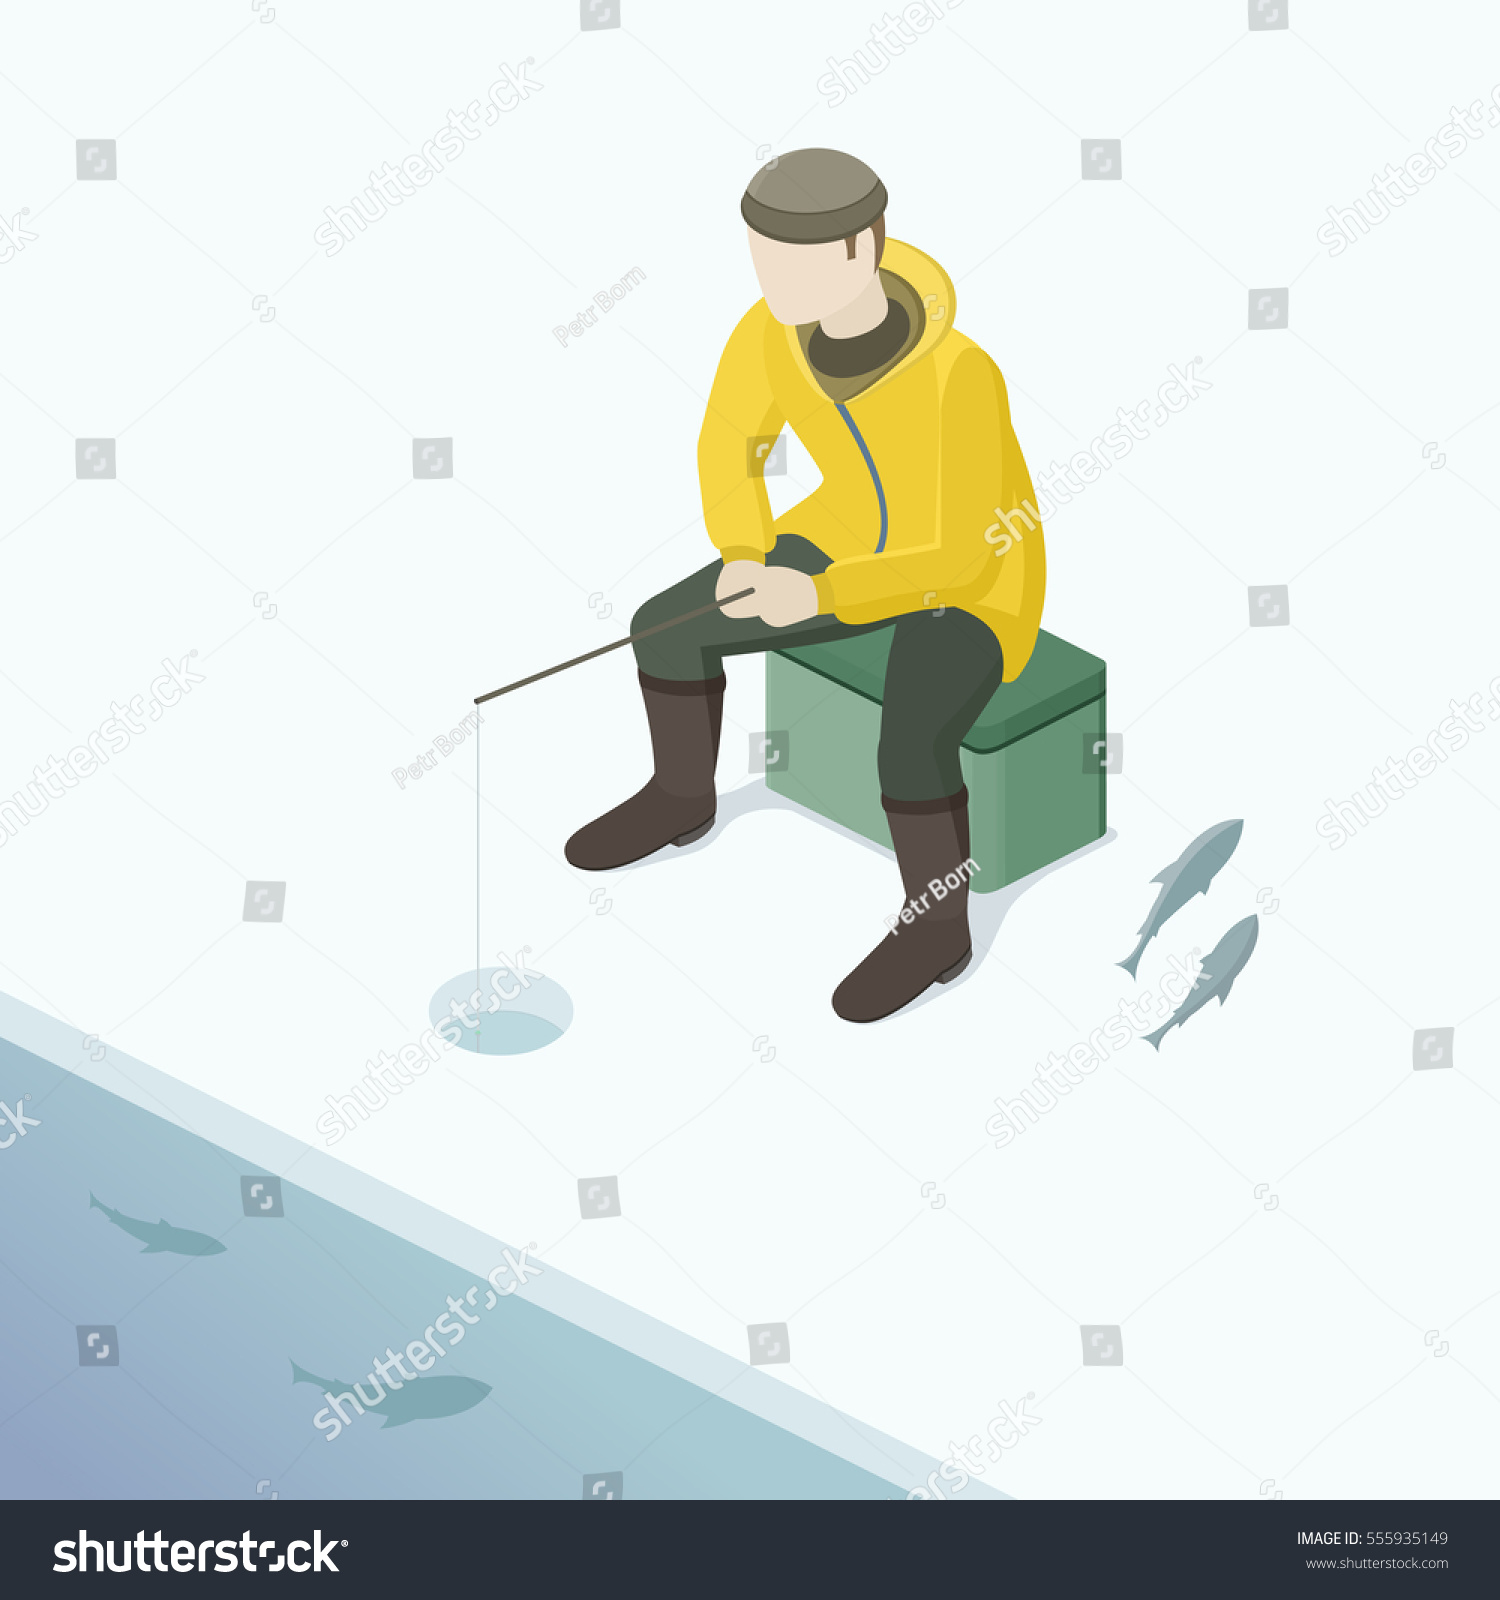 Download Ice Fishing Man On Ice Fishing Stock Vector 555935149 - Shutterstock